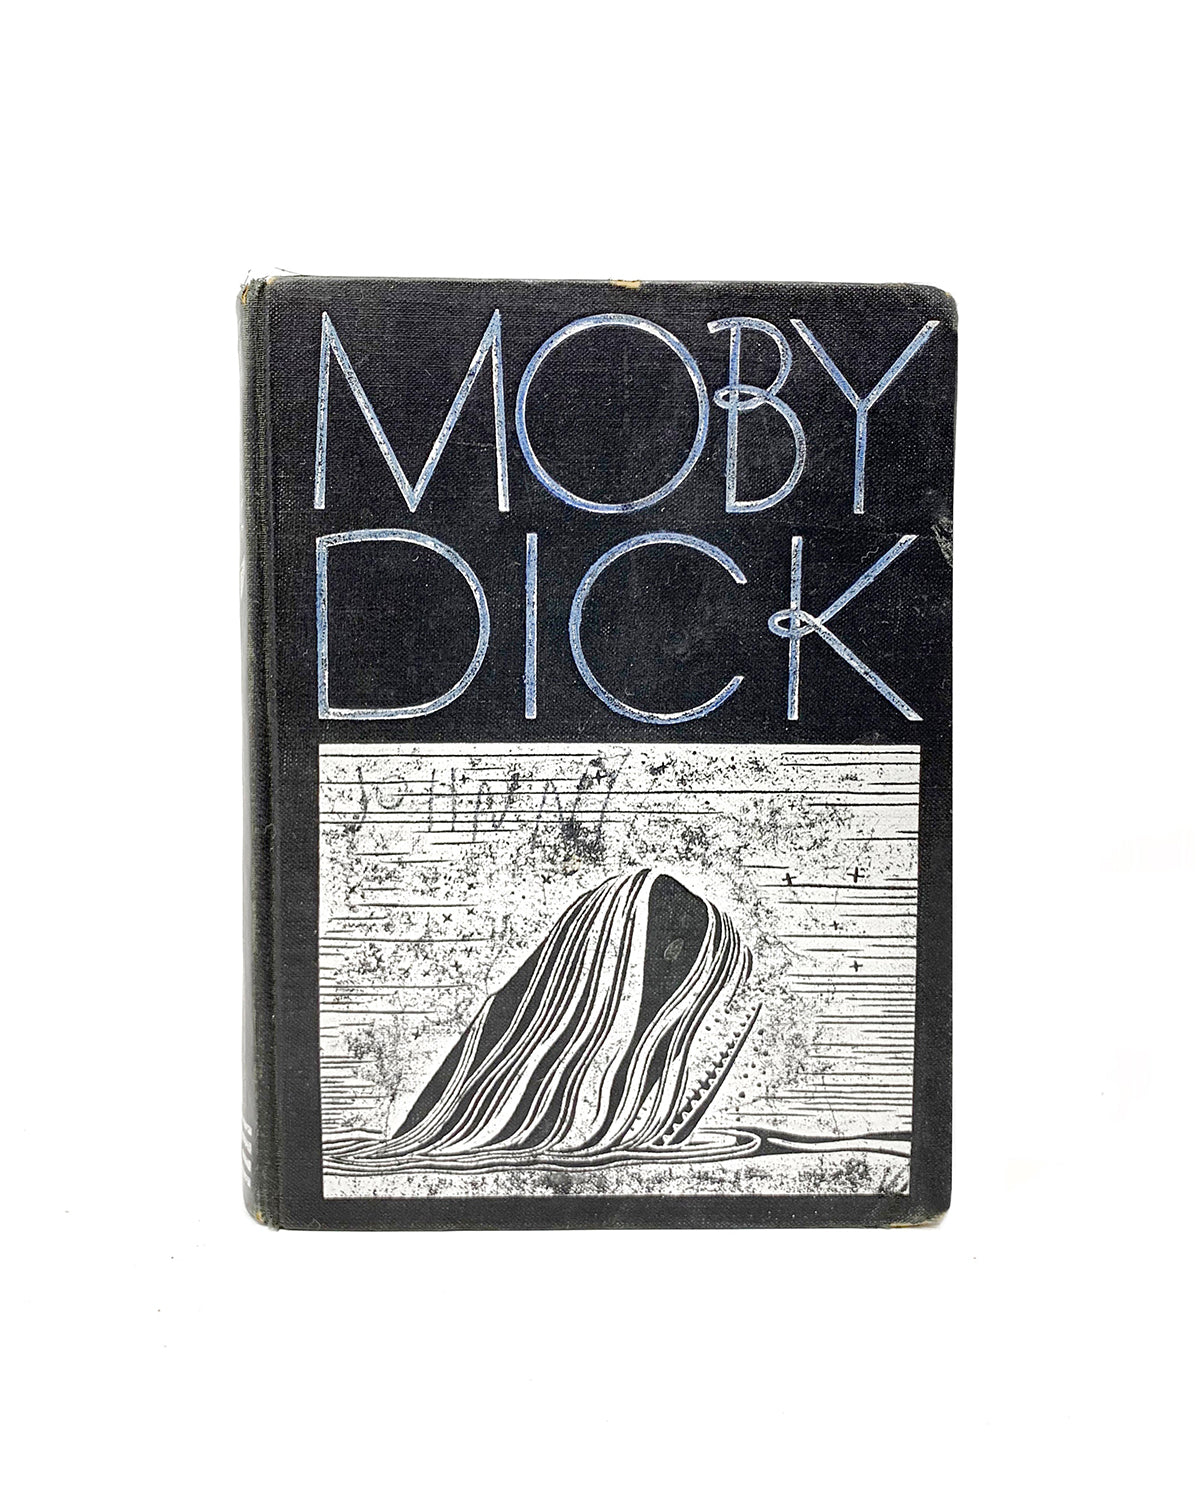 Kid Johnny's First Edition of Moby Dick, 1930